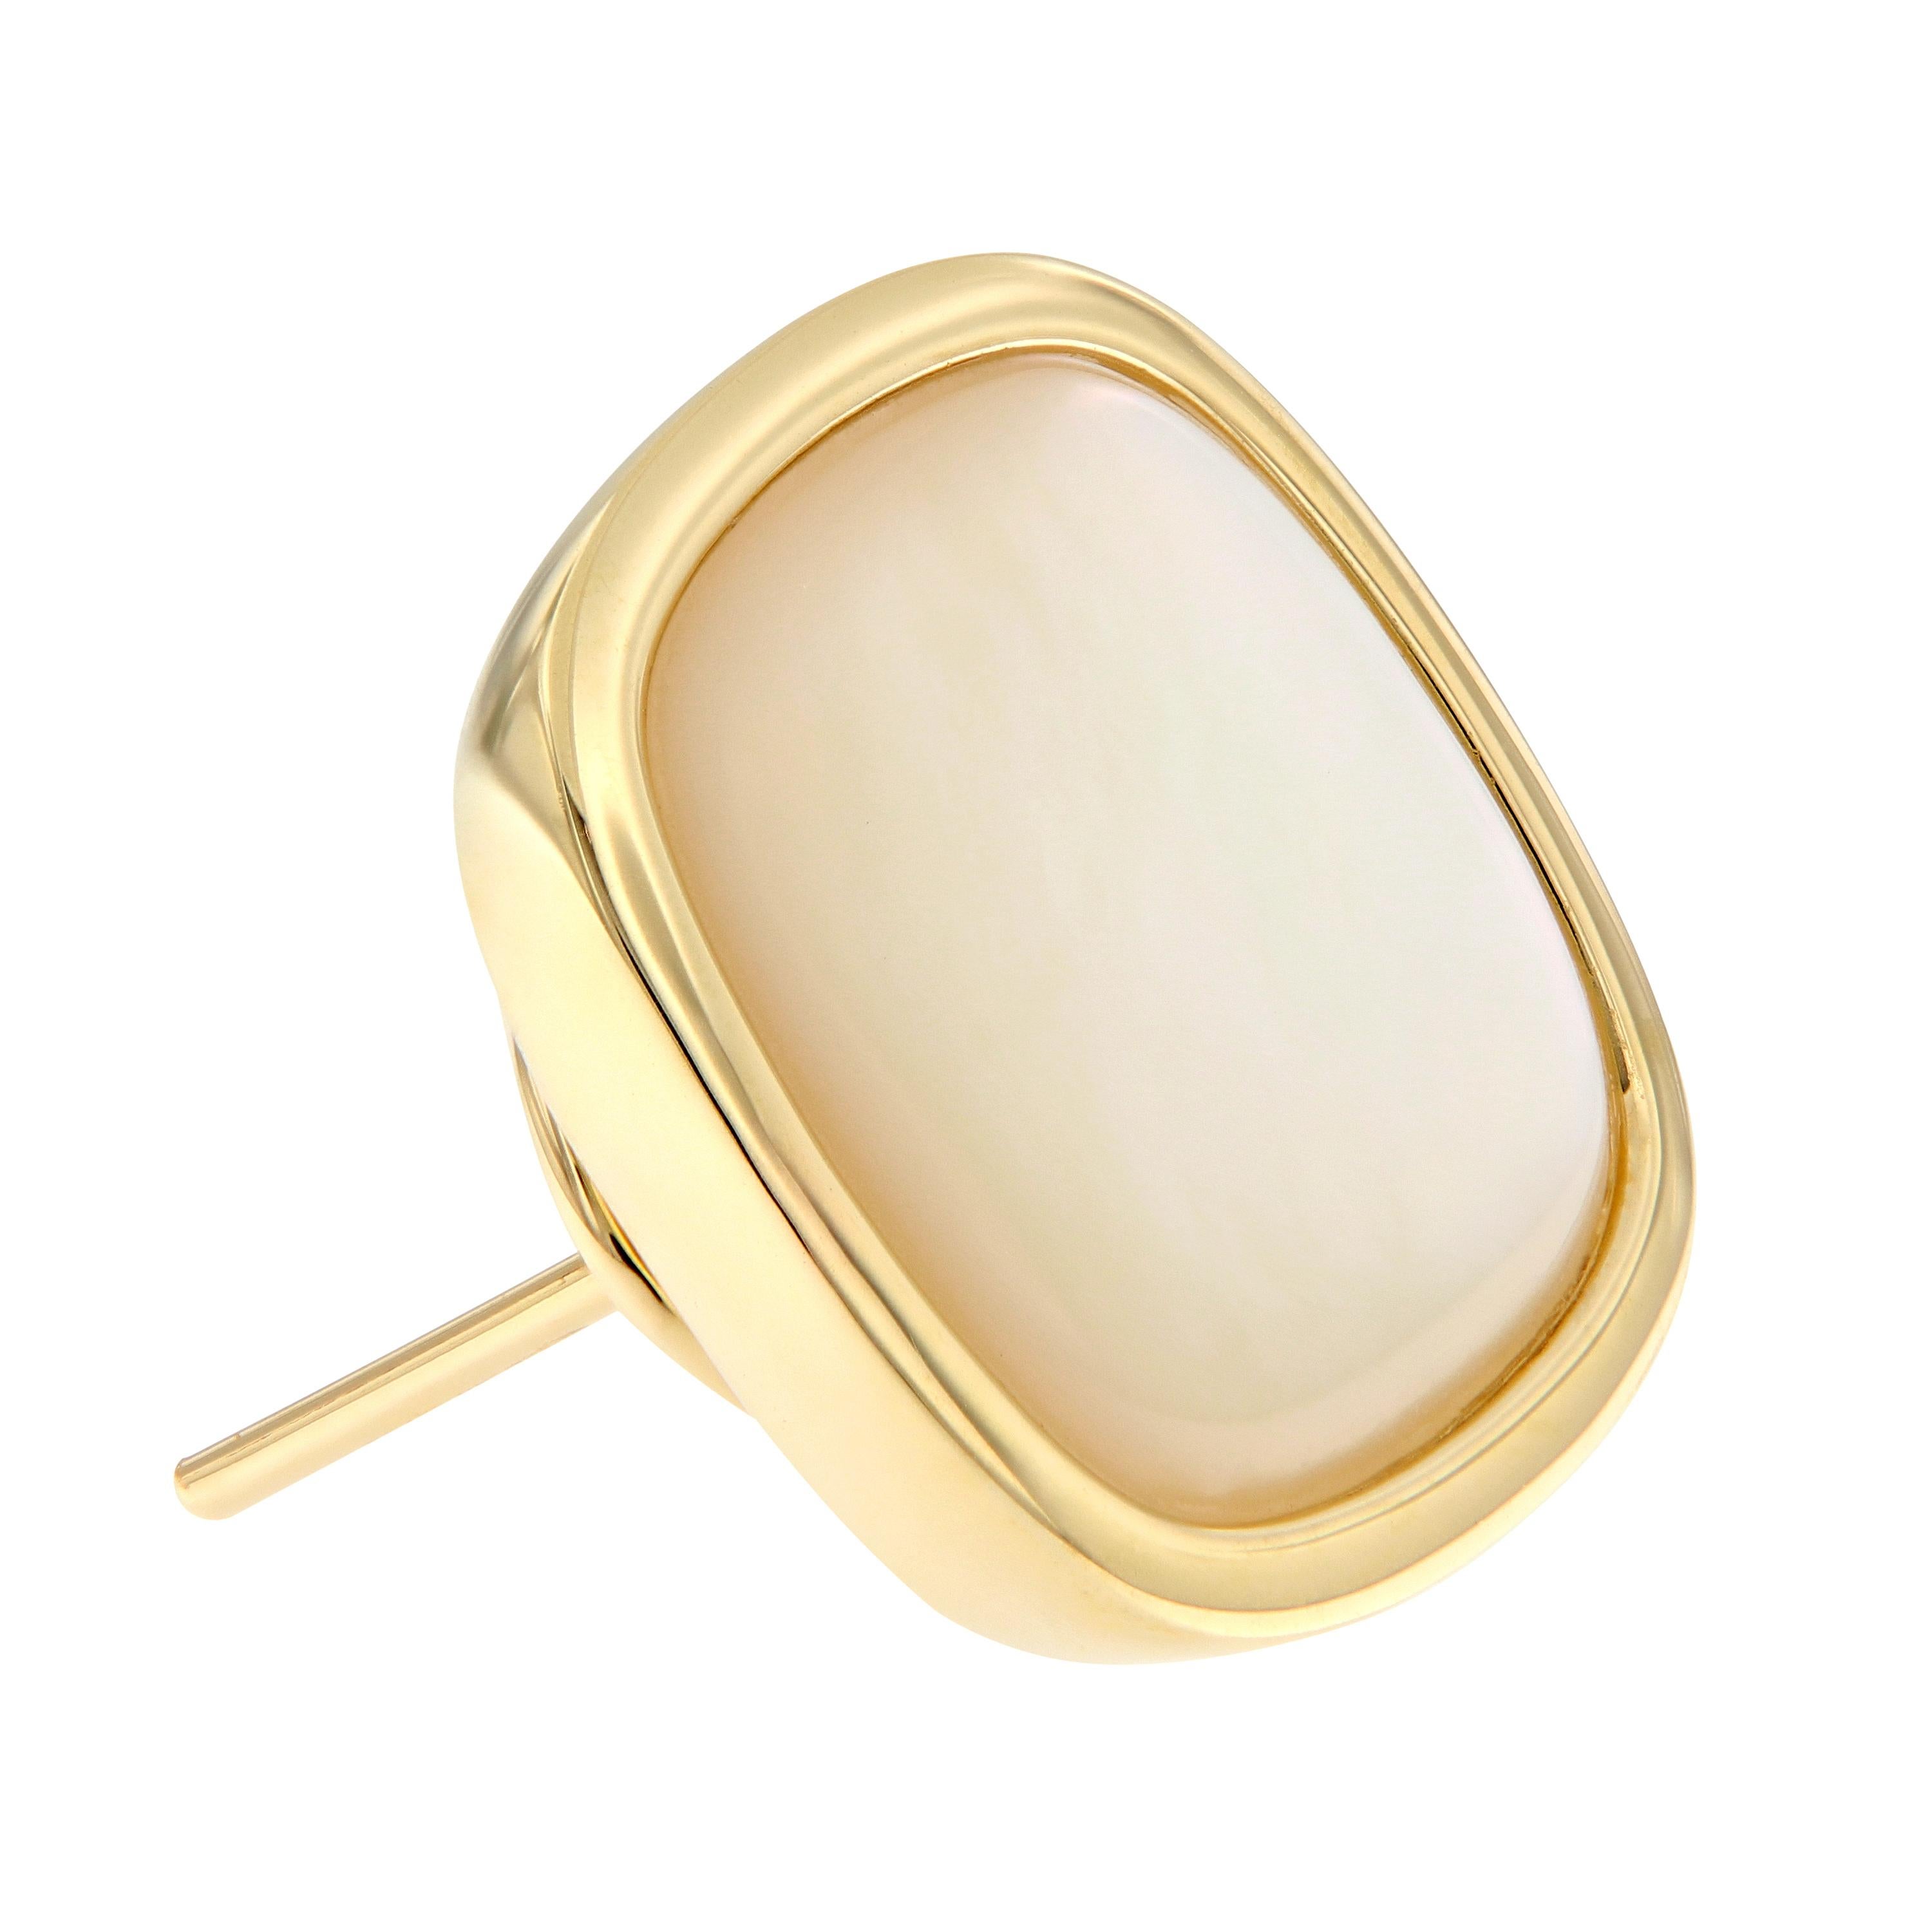 Large mother-of-pearl button style earrings make a statement but are a forever a classic look perfect for every day. Mother of pearl is bezel set in 14k yellow gold. Weigh 12.4. Earrings are approximately 0.75 inches by 0.75 inches.